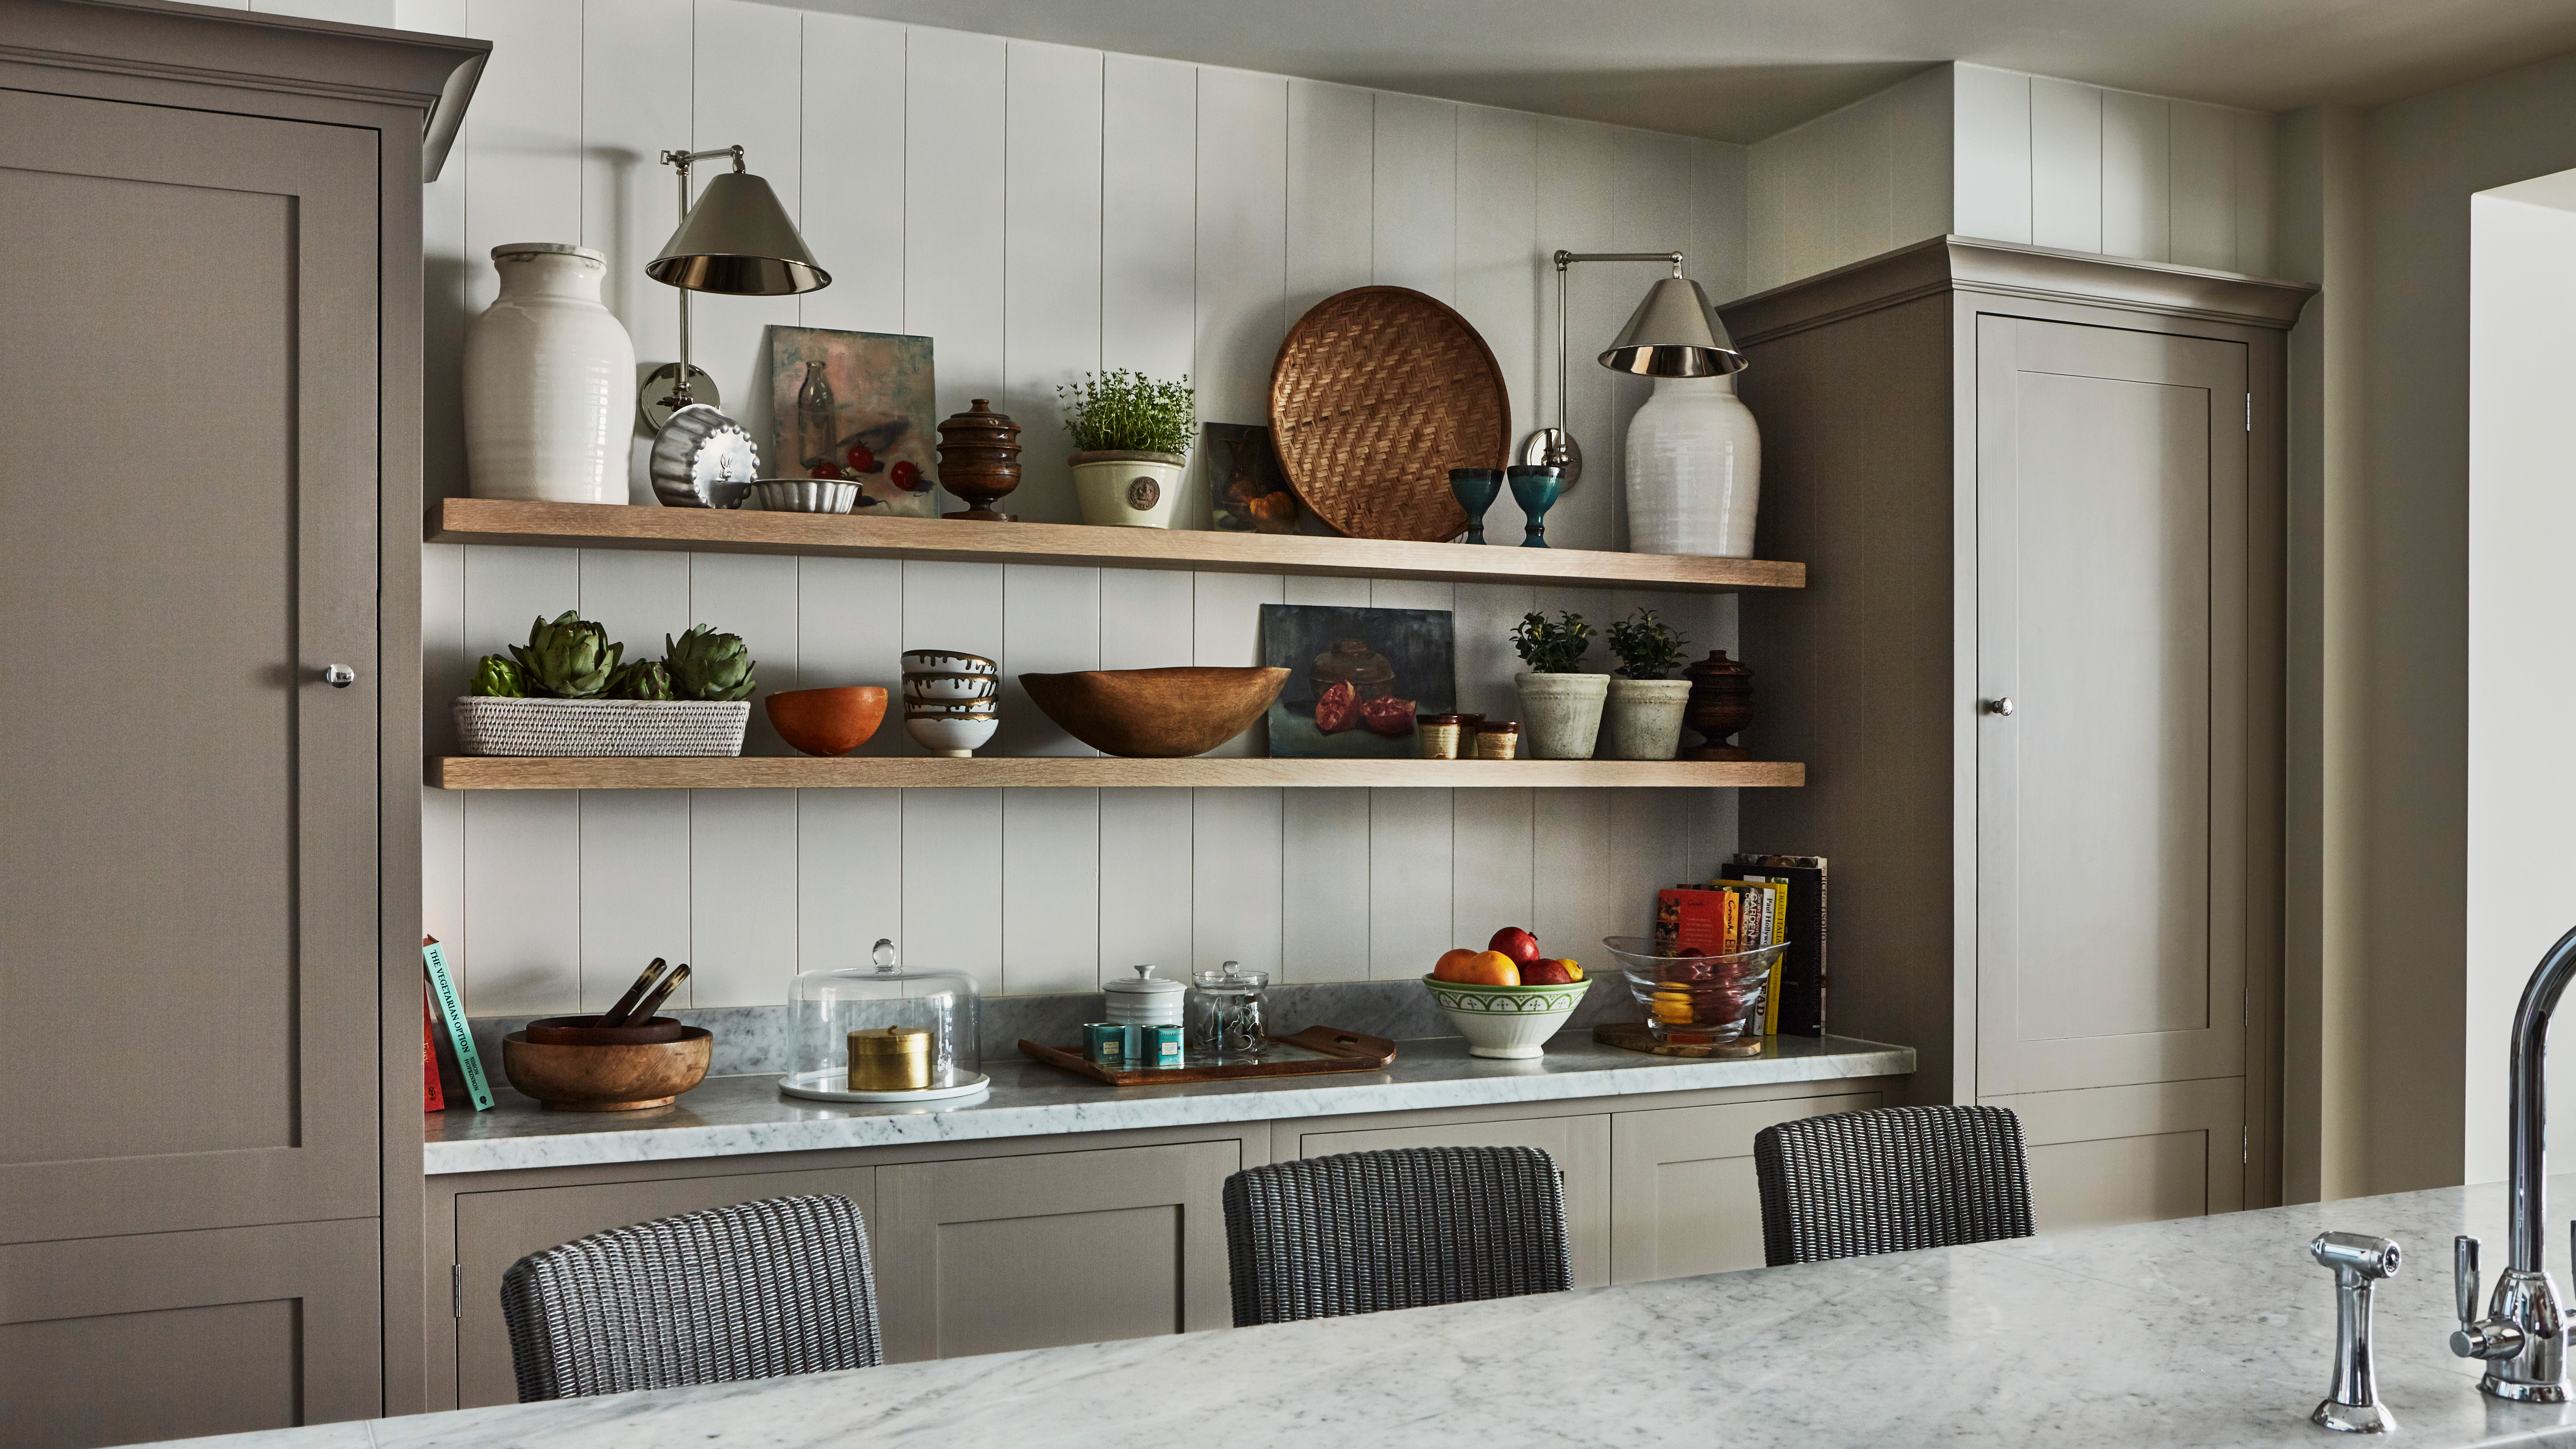 Kitchen Shelving Ideas 14 Ways To, How To Use Open Shelving In Kitchen